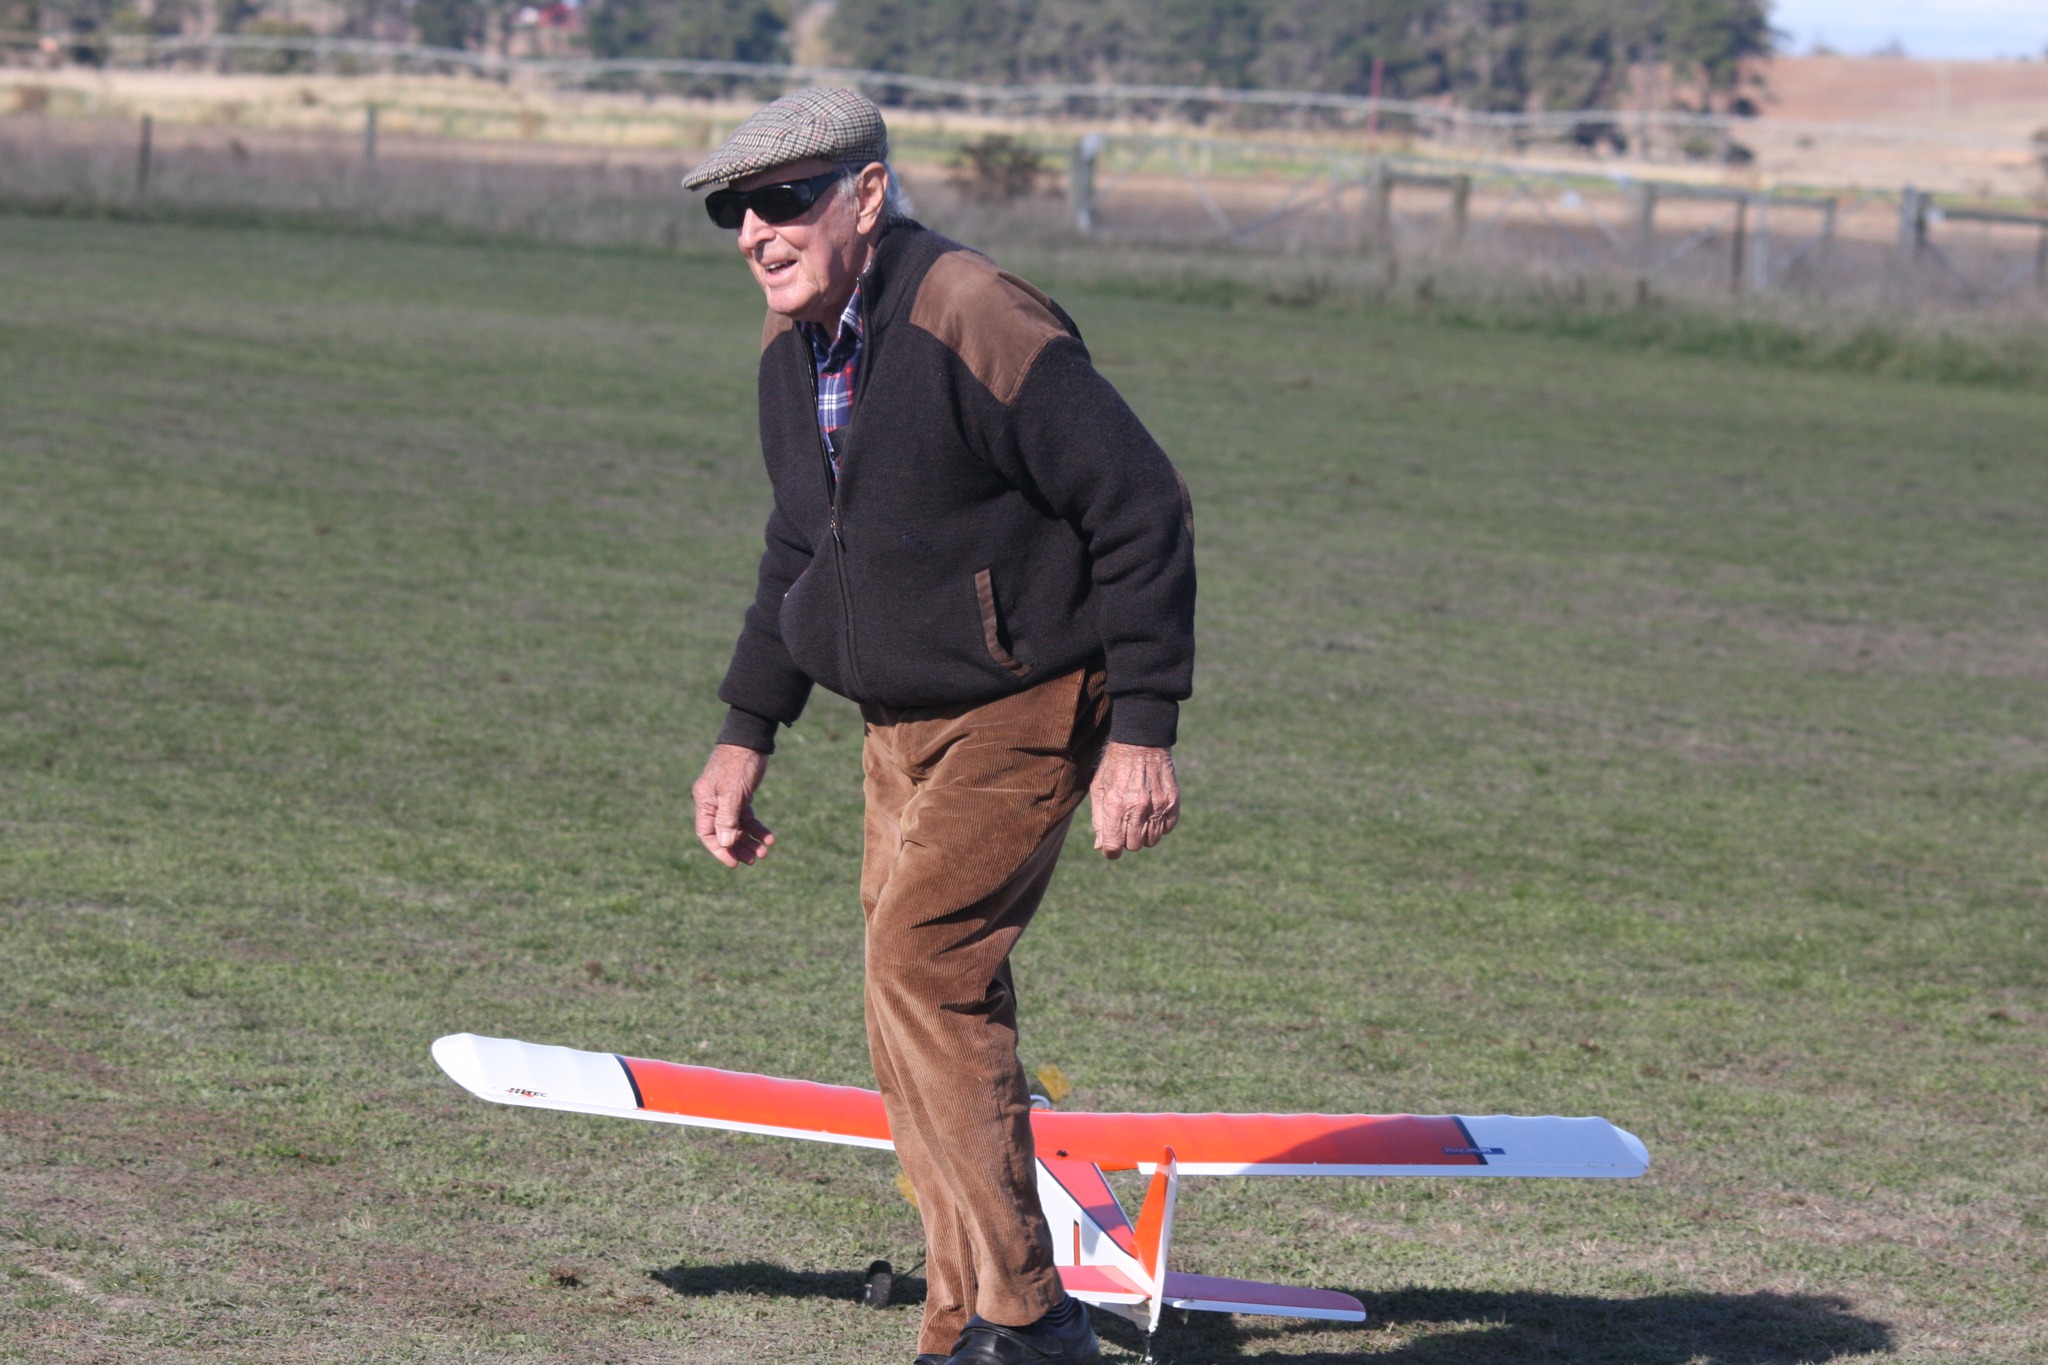 Fred readies the Hustler for take-off